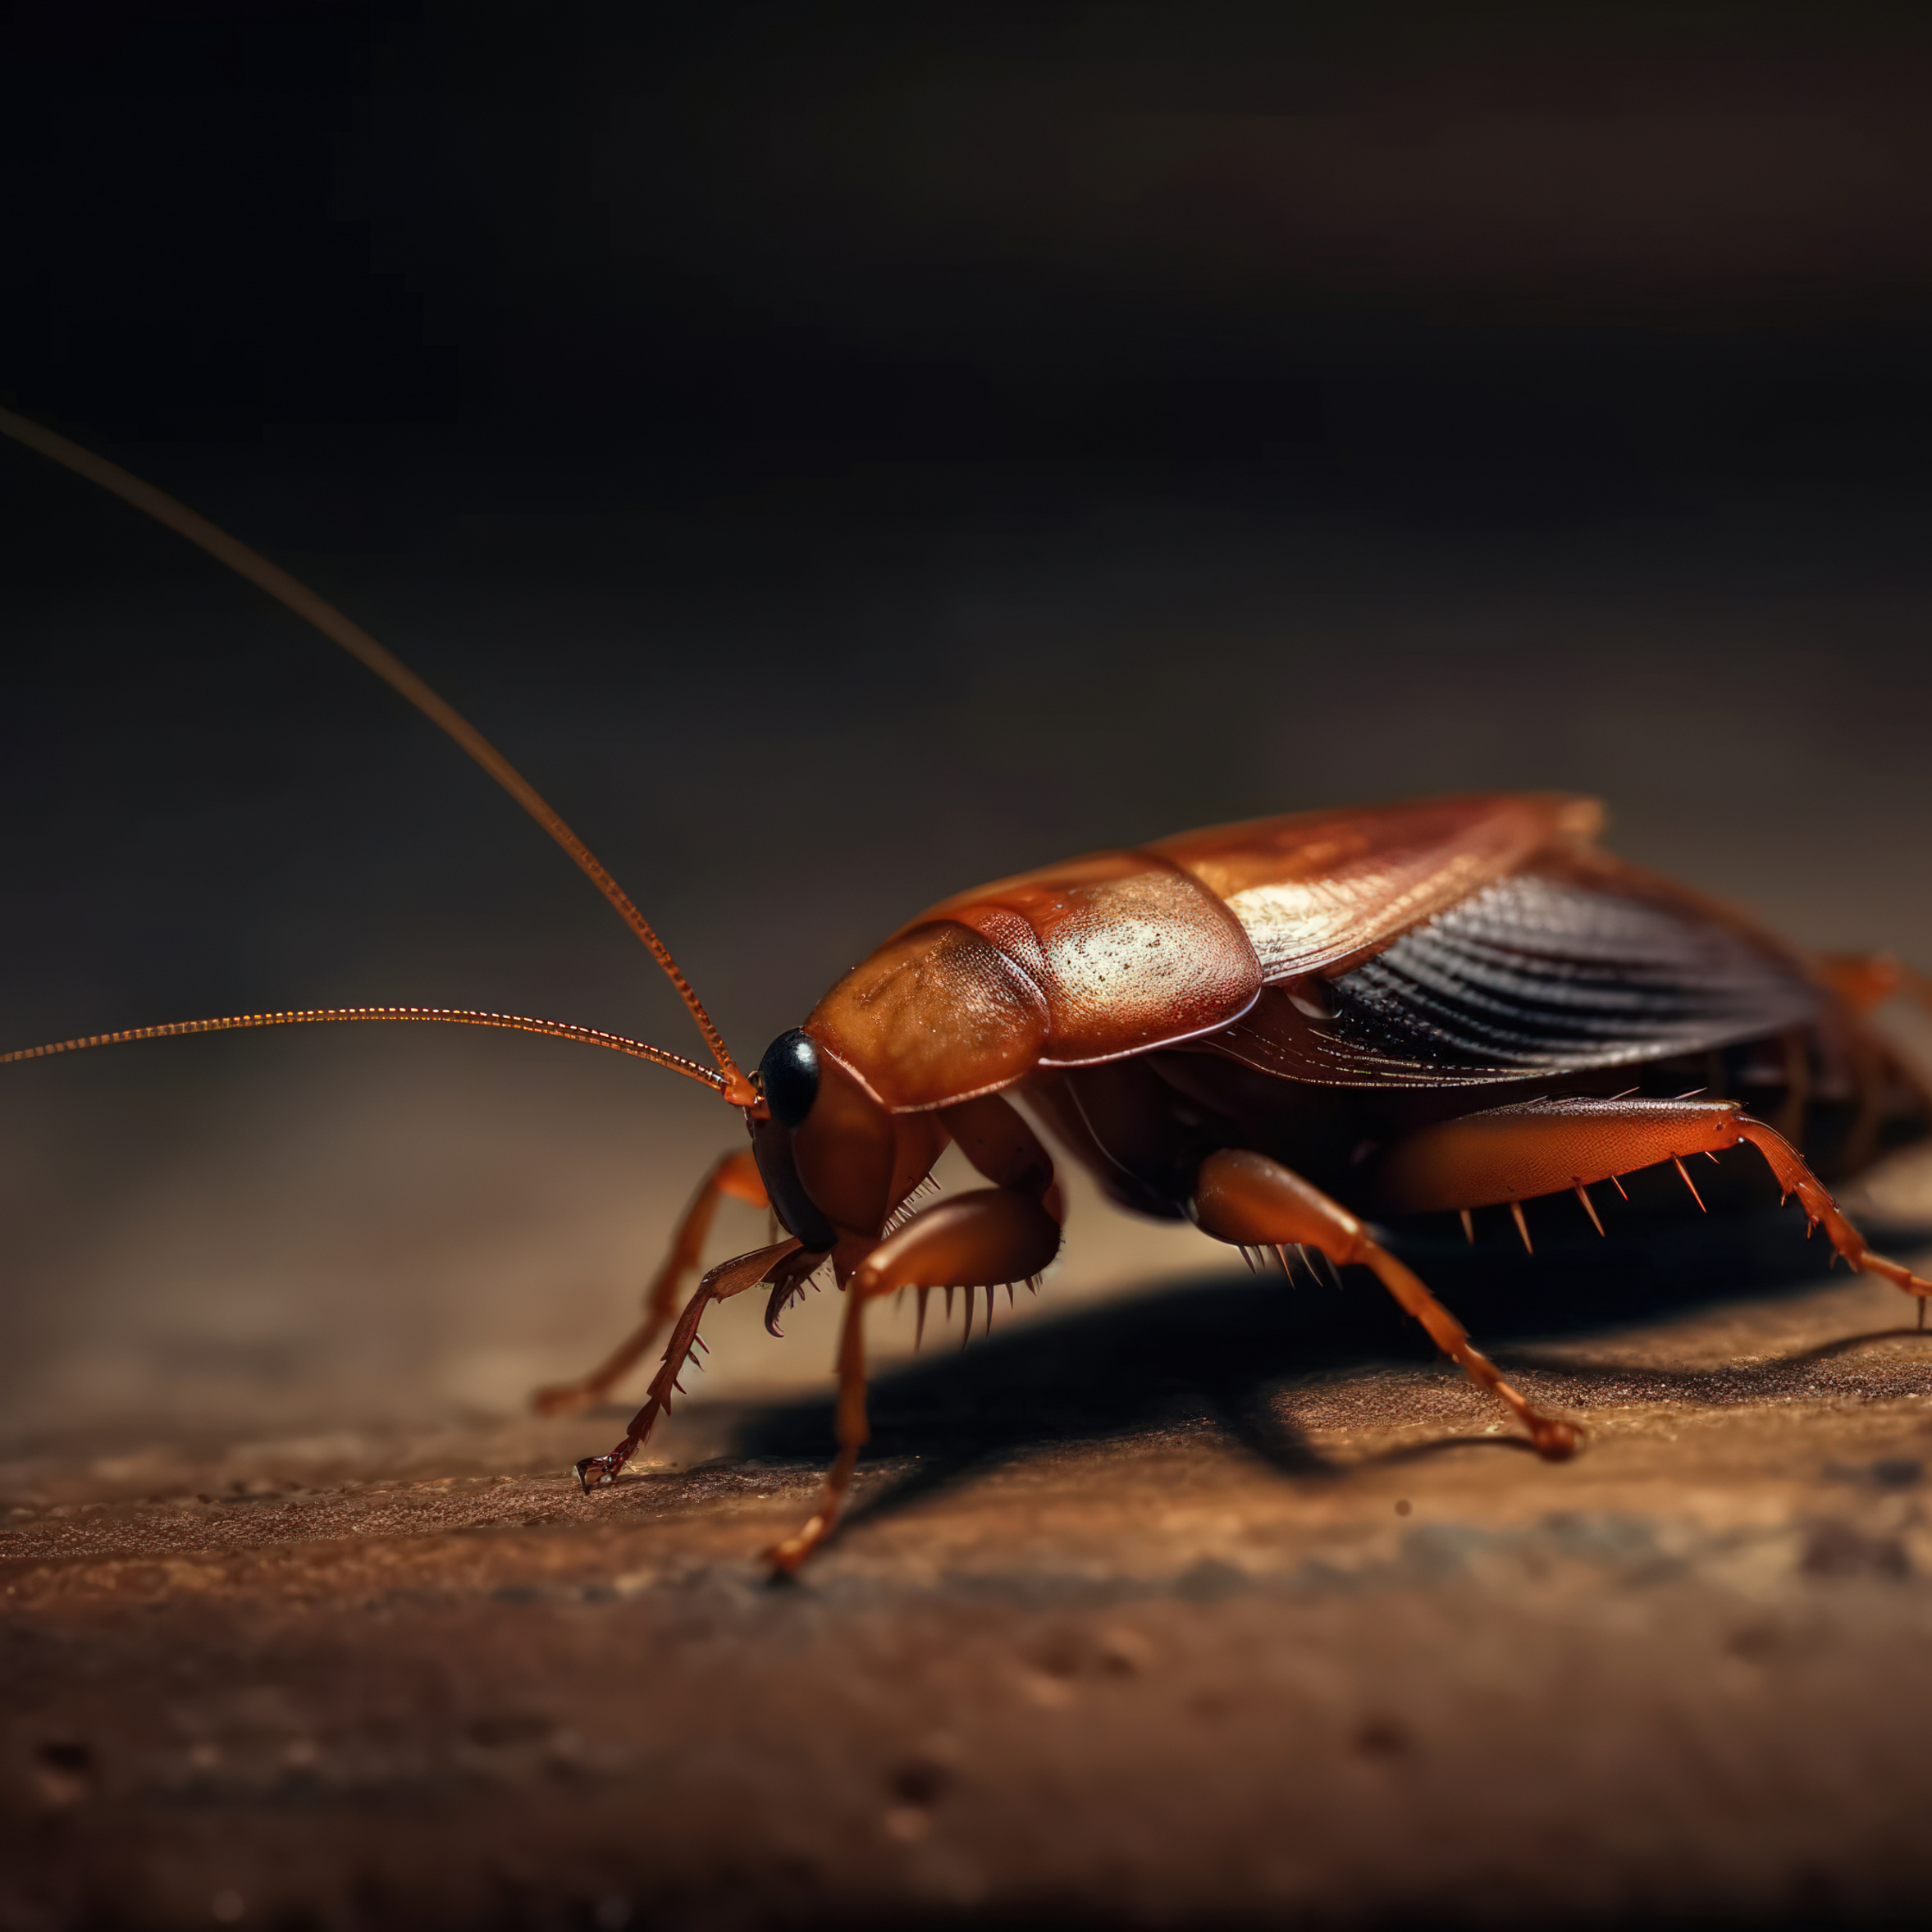 A cockroach crawling in a home - call Thorn to hire a cockroach exterminator in St. George, UT!